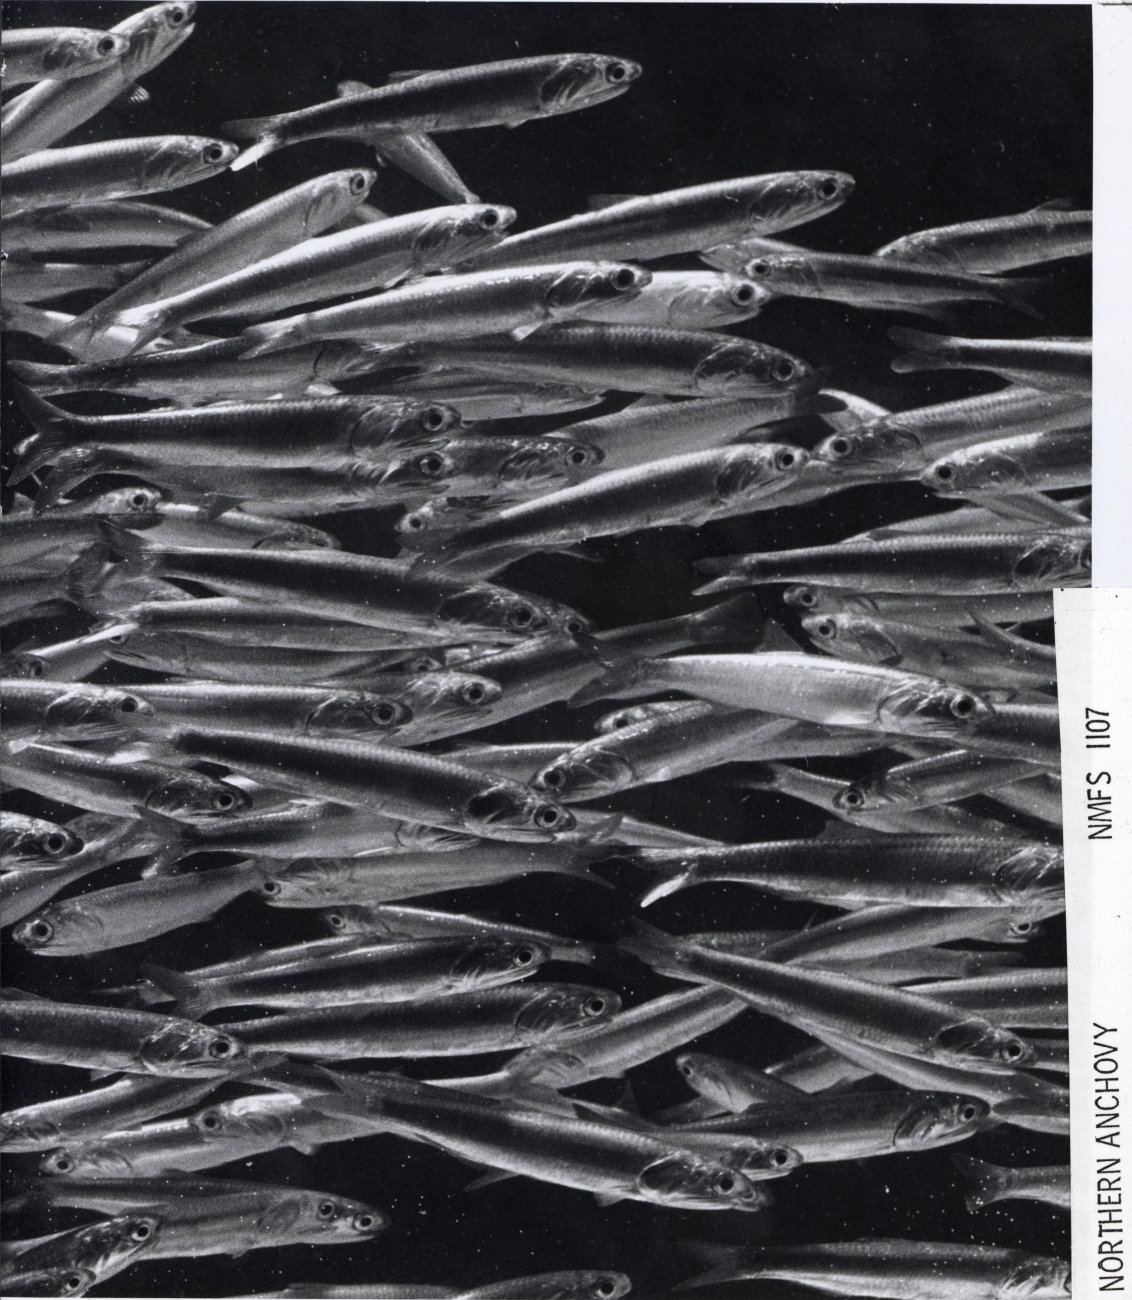 A school of northern anchovy